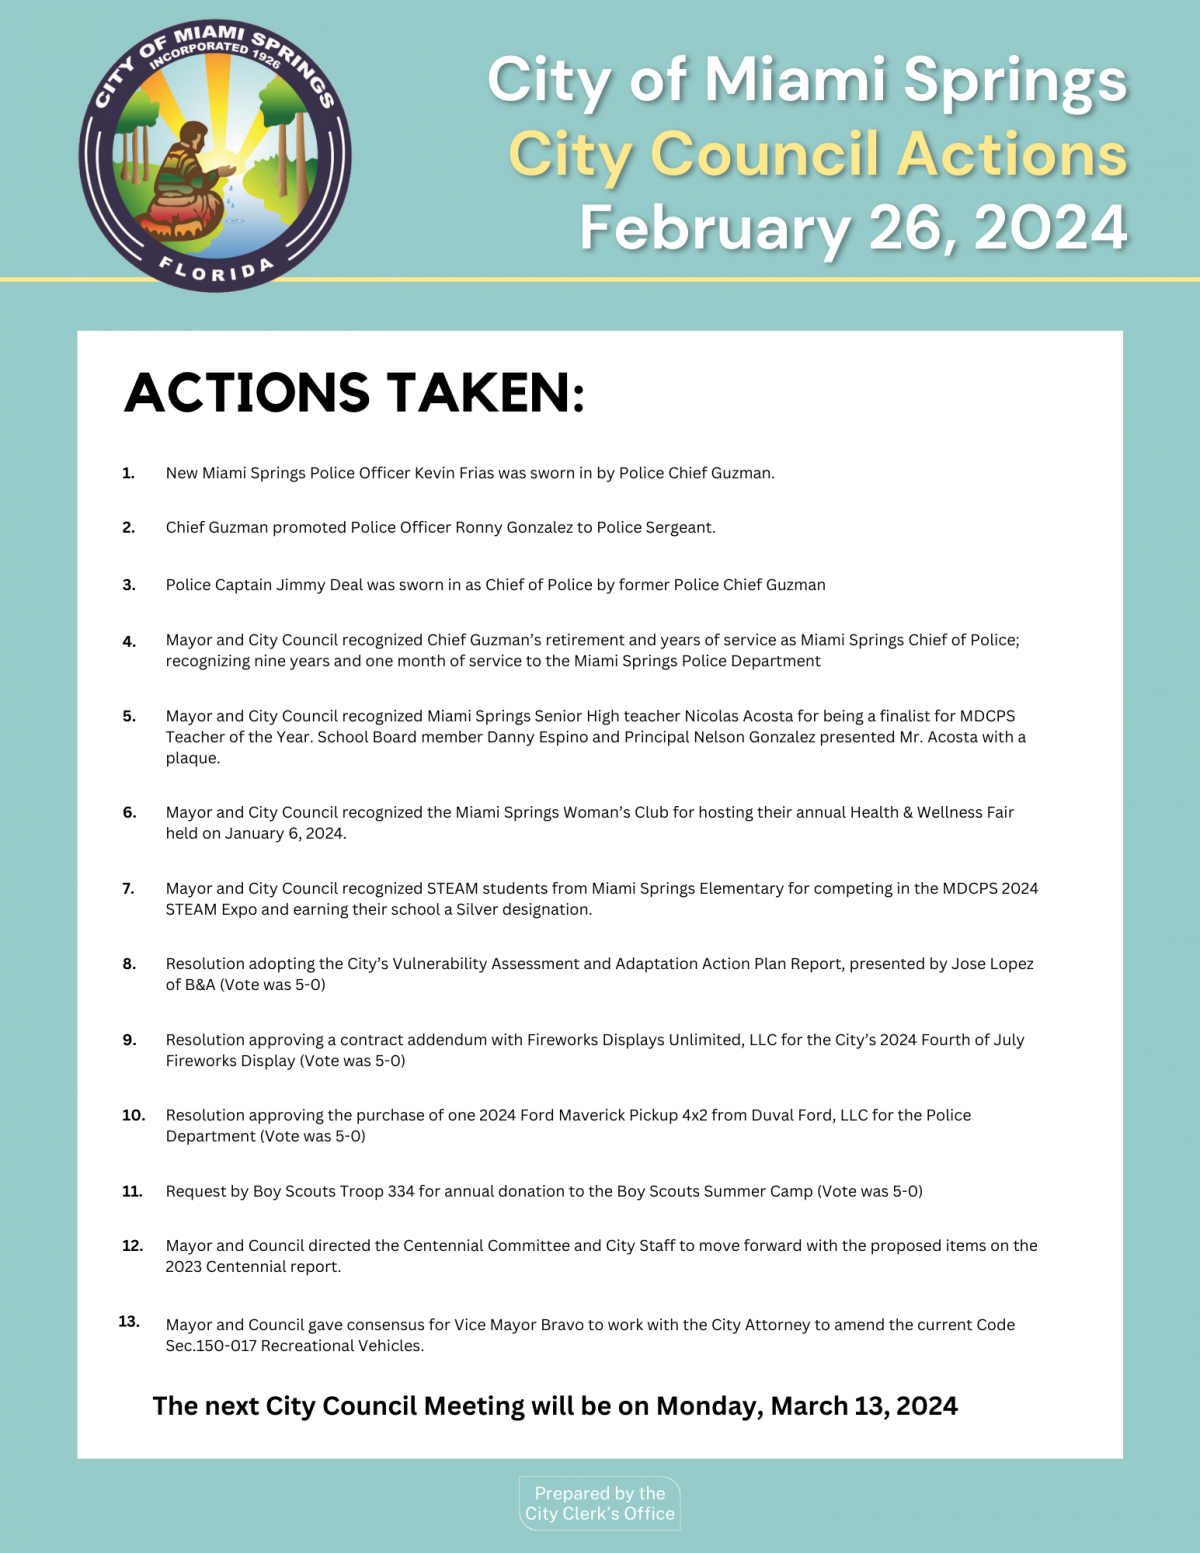 City Council Actions - February 26, 2024